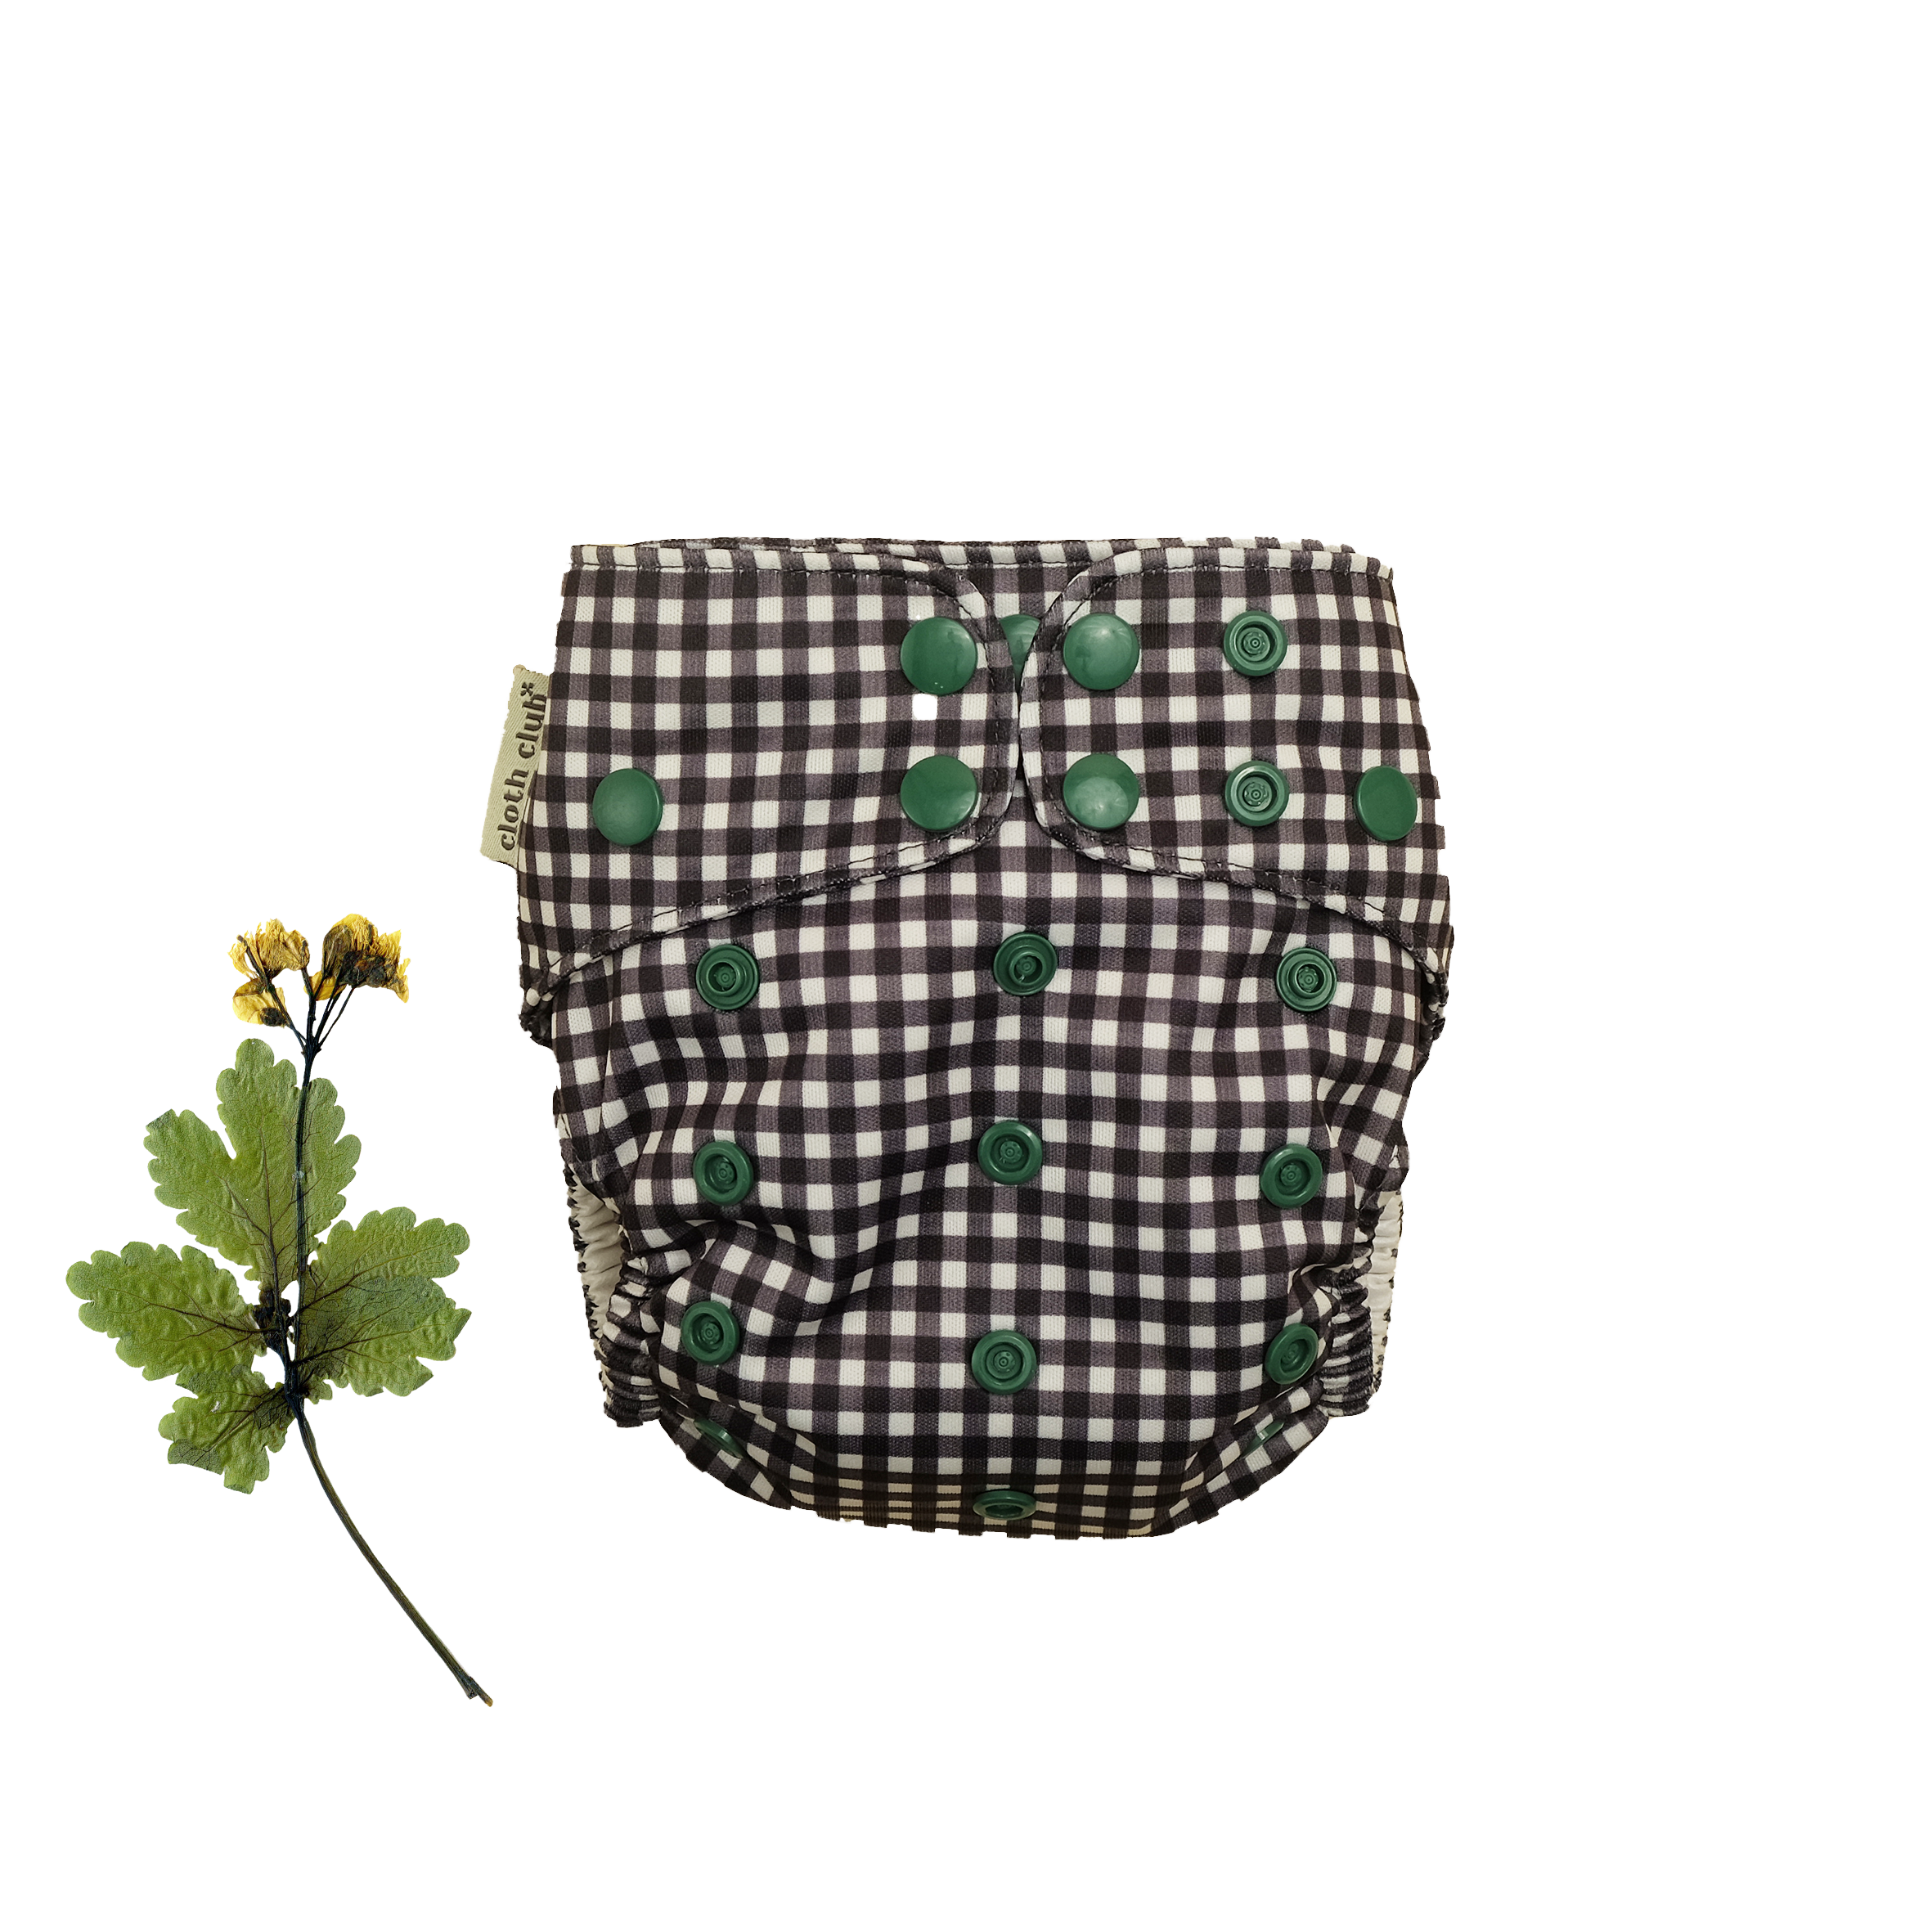 'Hunt and gather' is a gender neutral print that's got loads of personality. It features a fine, deep charcoal and beige gingham with hunter green snaps that really pop! Cloth Club Reusable Cloth Nappy